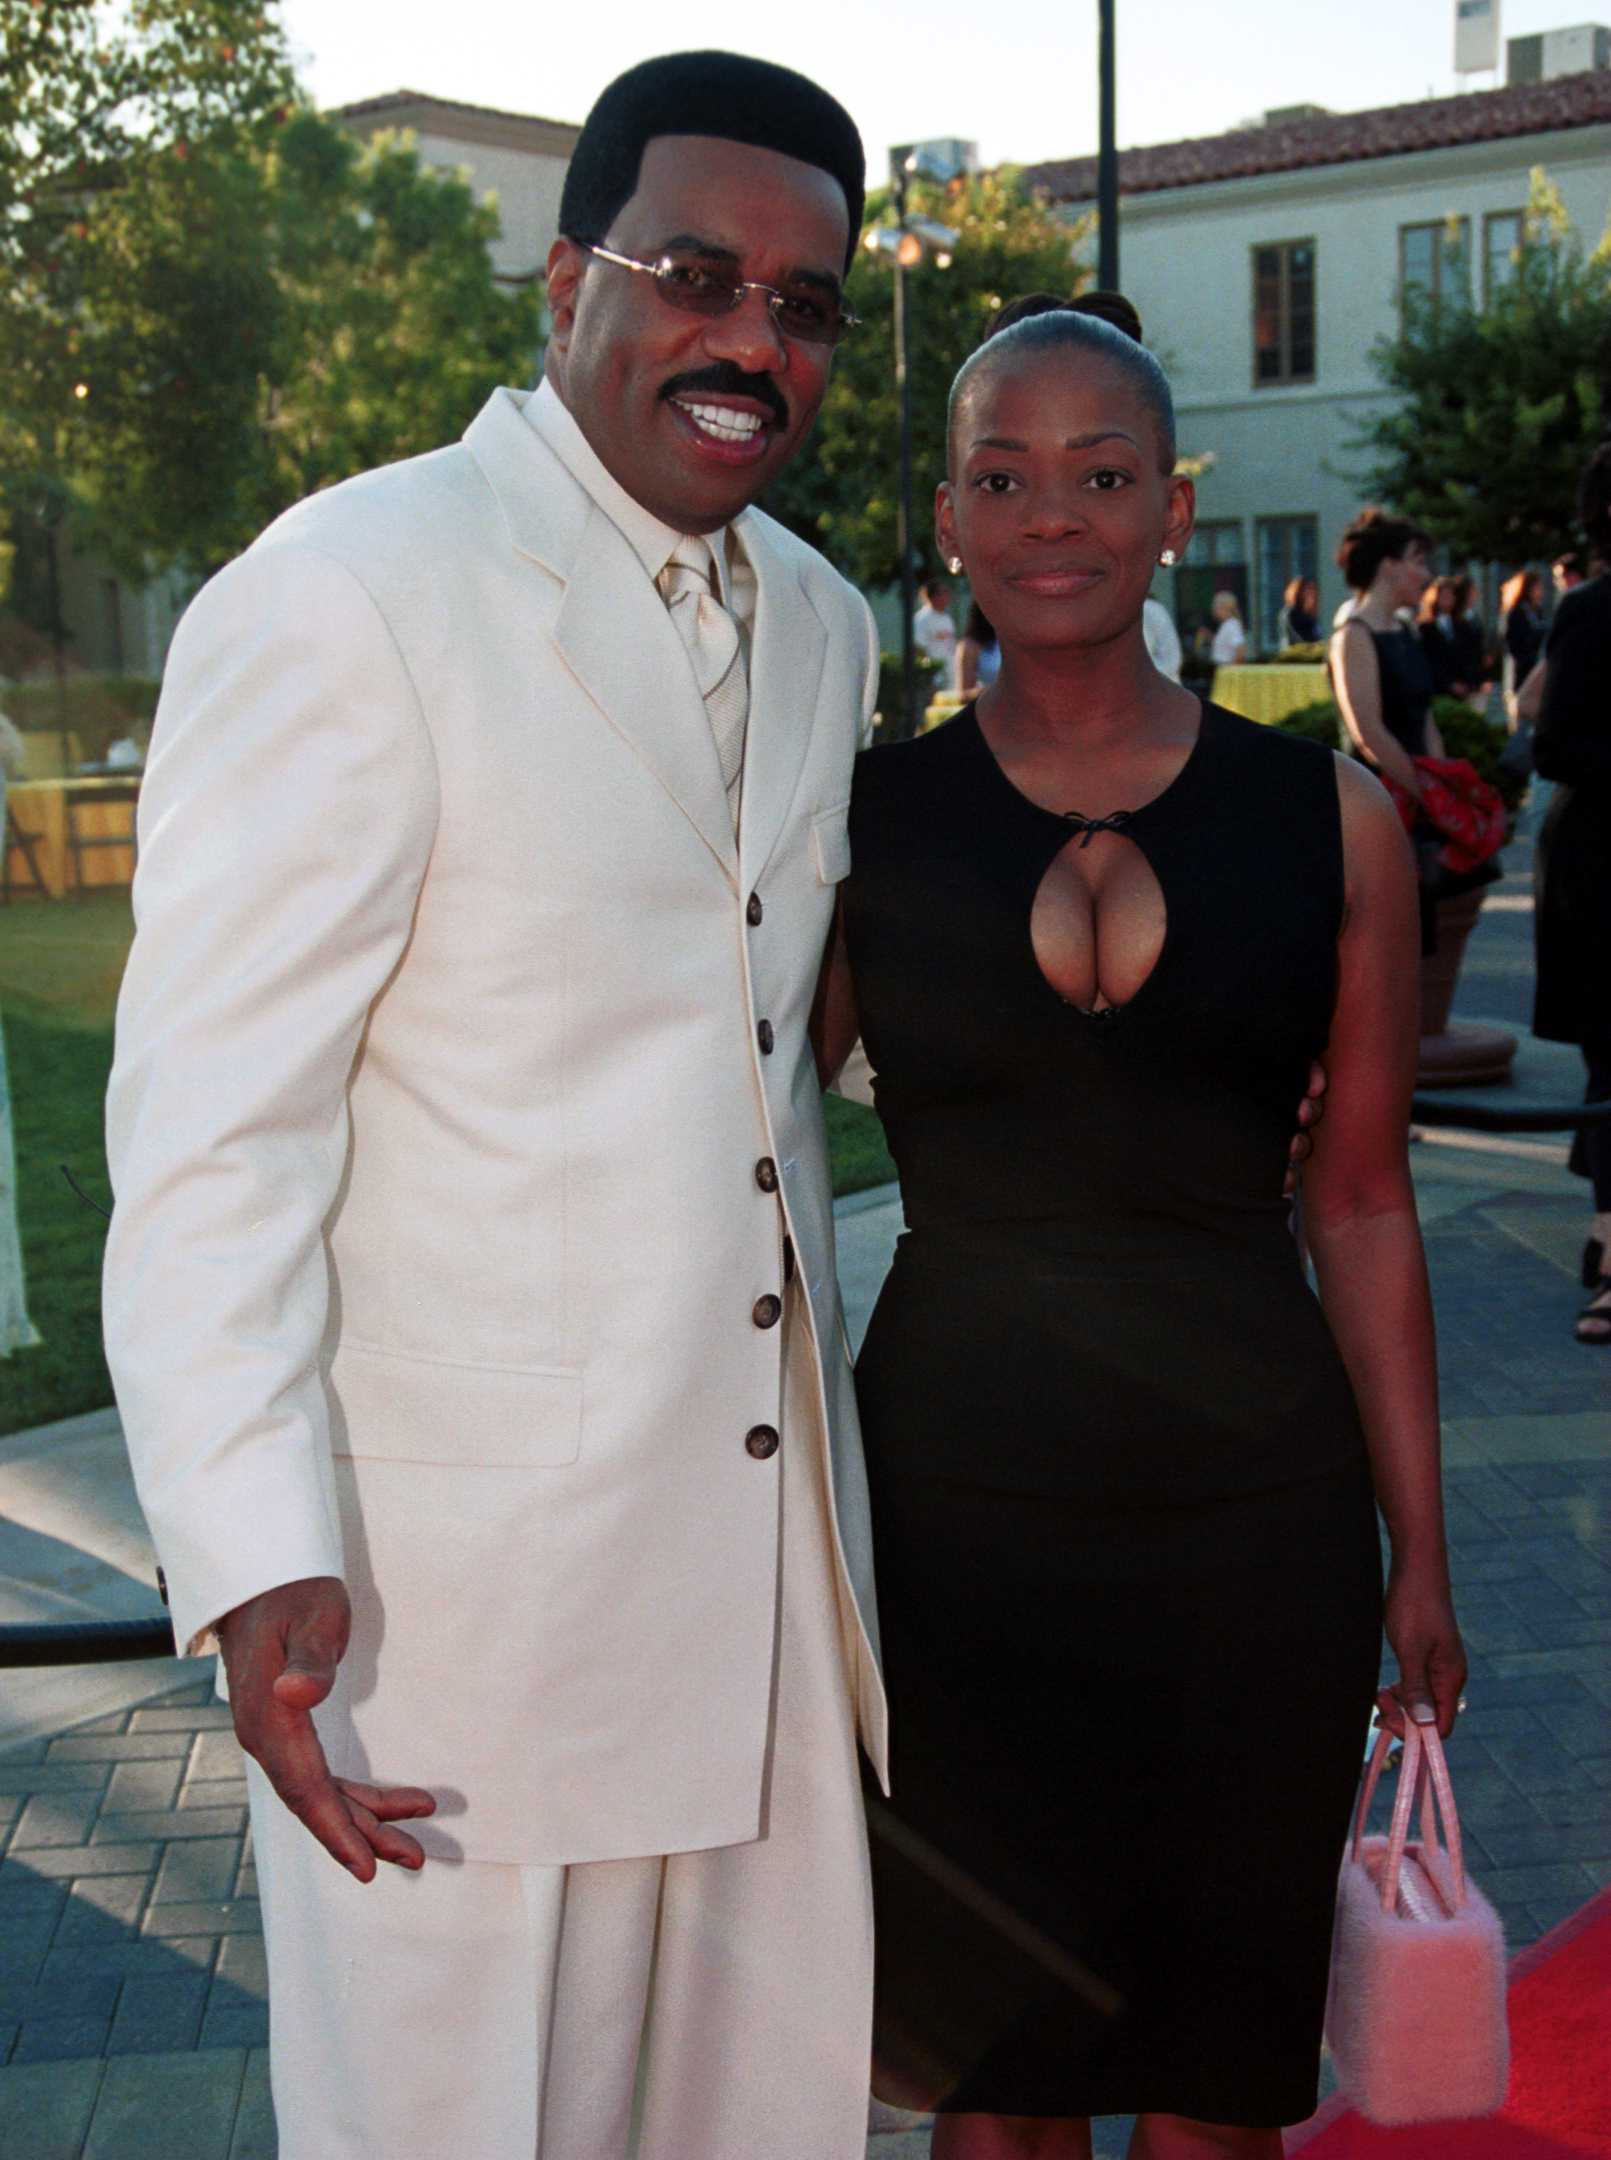 Steve Harvey accompanies his wife Mary at the premiere screening of "The Original Kings Of Comedy" August 10, 2000 in Hollywood, CA. | Source: Getty Images